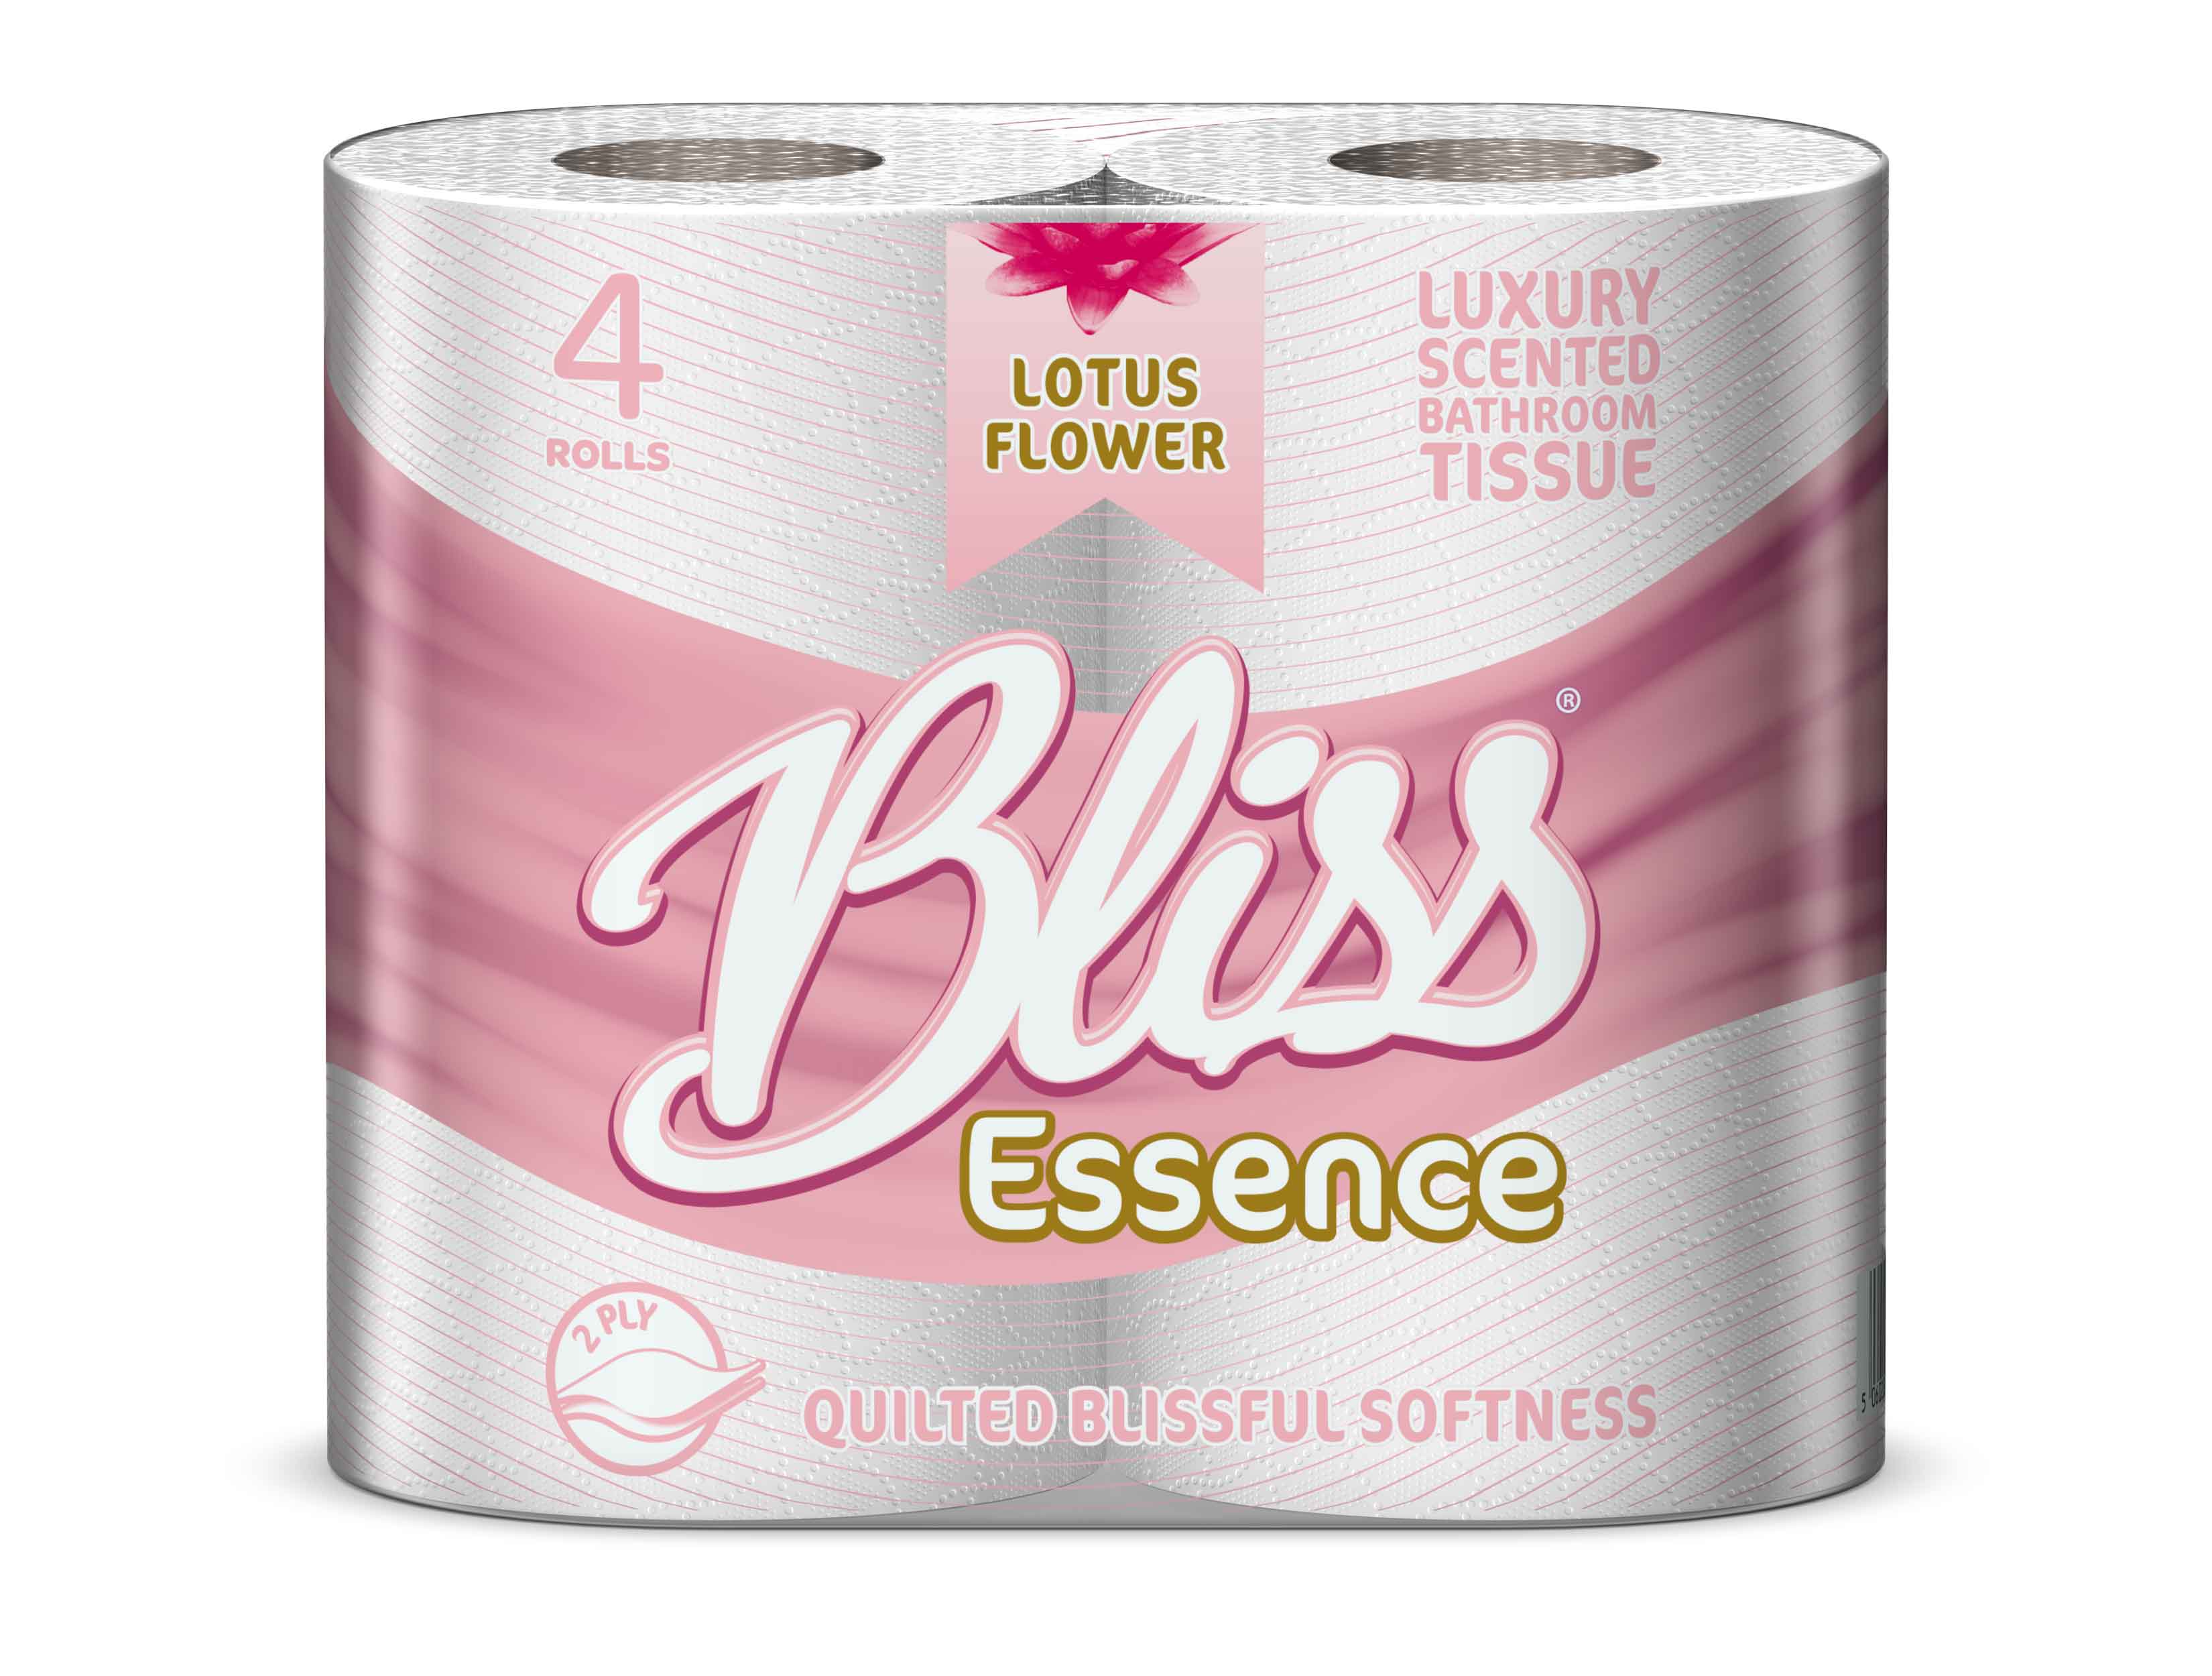 Luxury Scented Bliss Bath tissue paper 40 Rolls 2Ply Lotus Flower